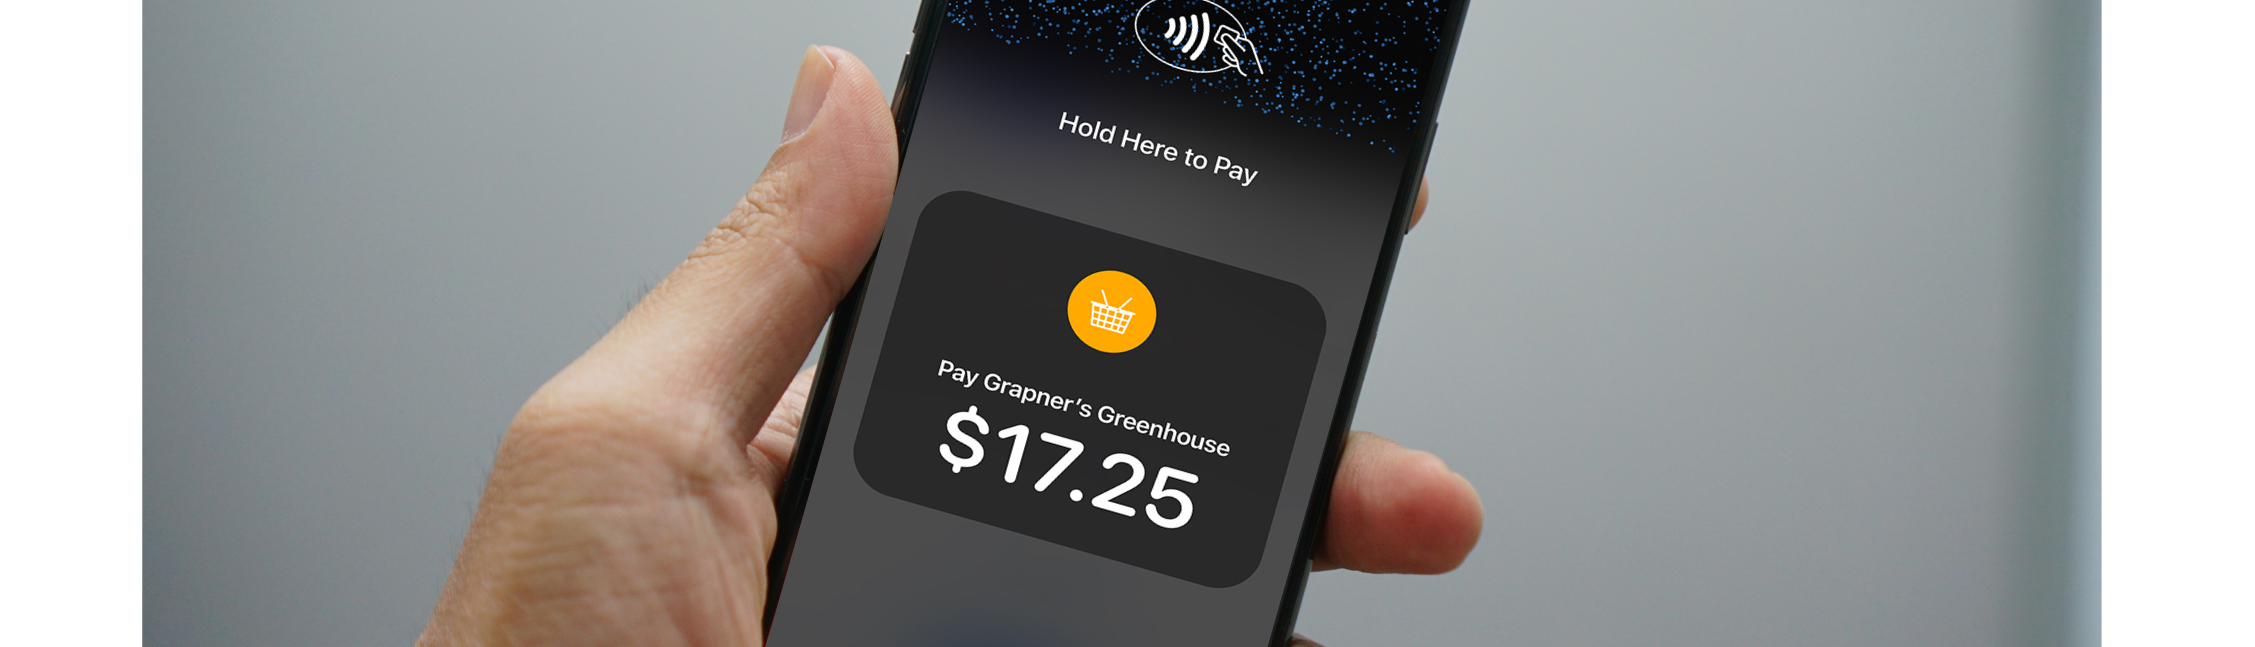 Tap to Pay: Accept Payments Through Your Phone